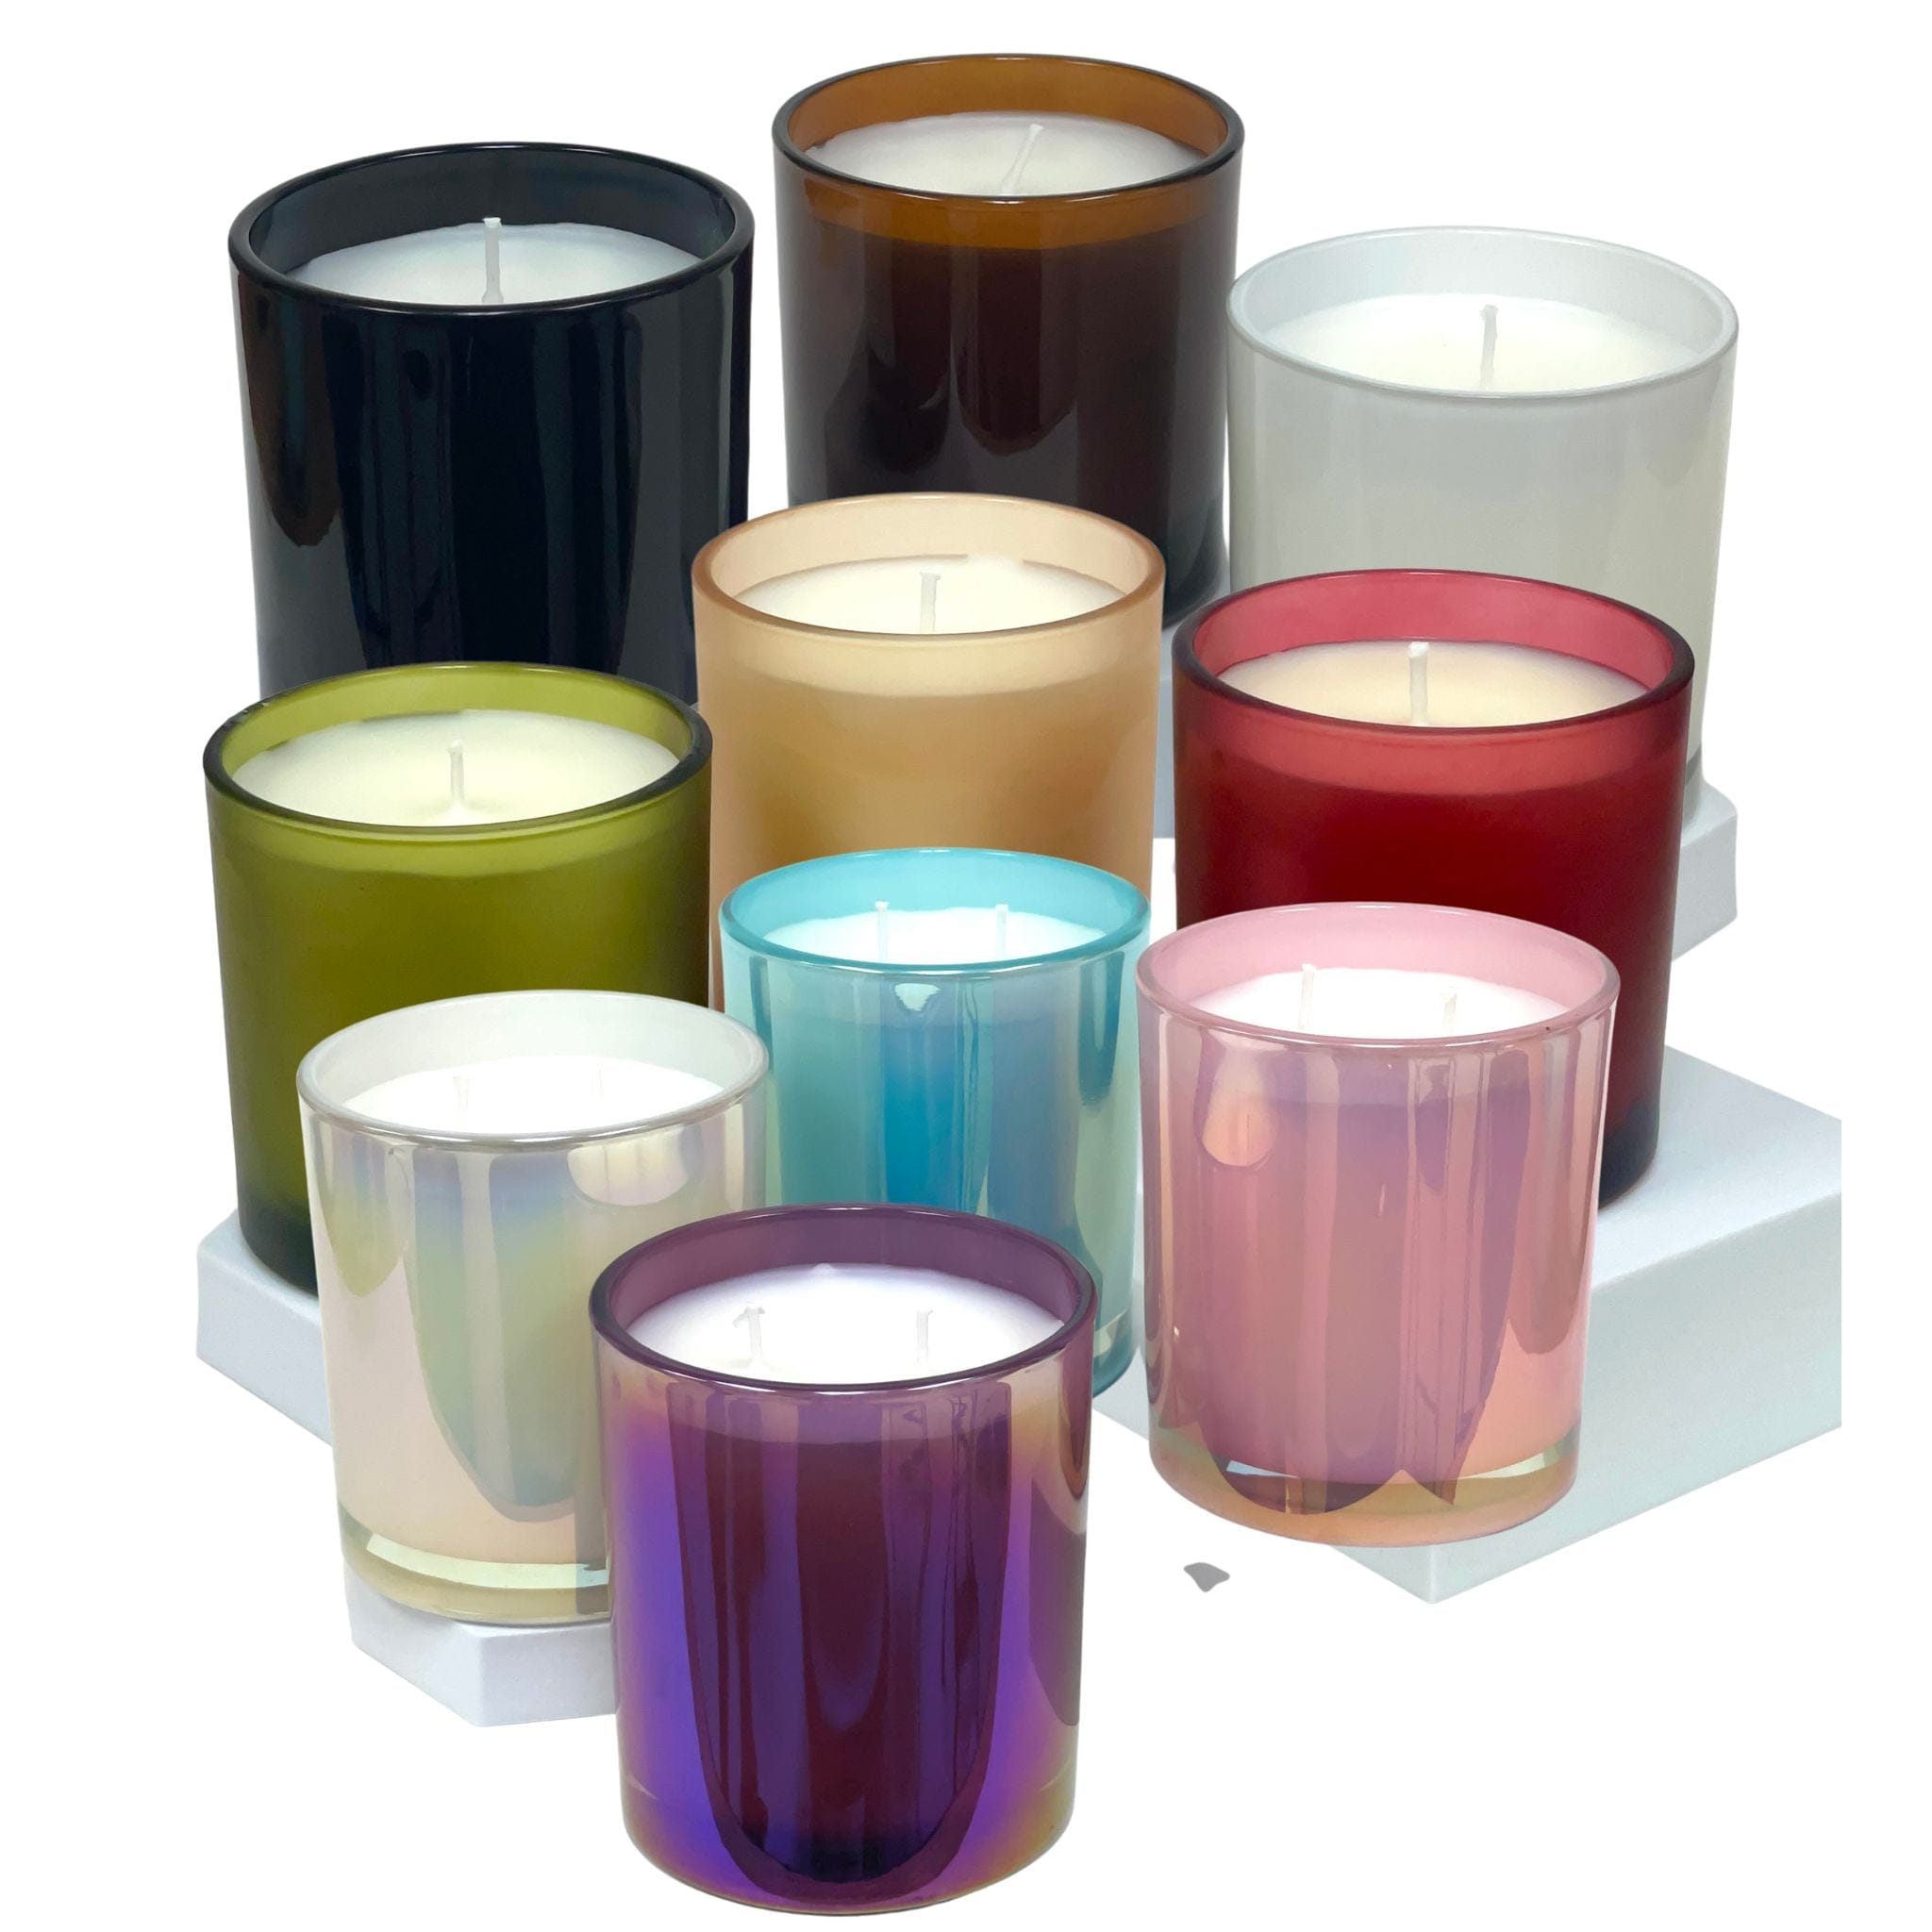 Sample Candle Fragrance Kit-For Private Label